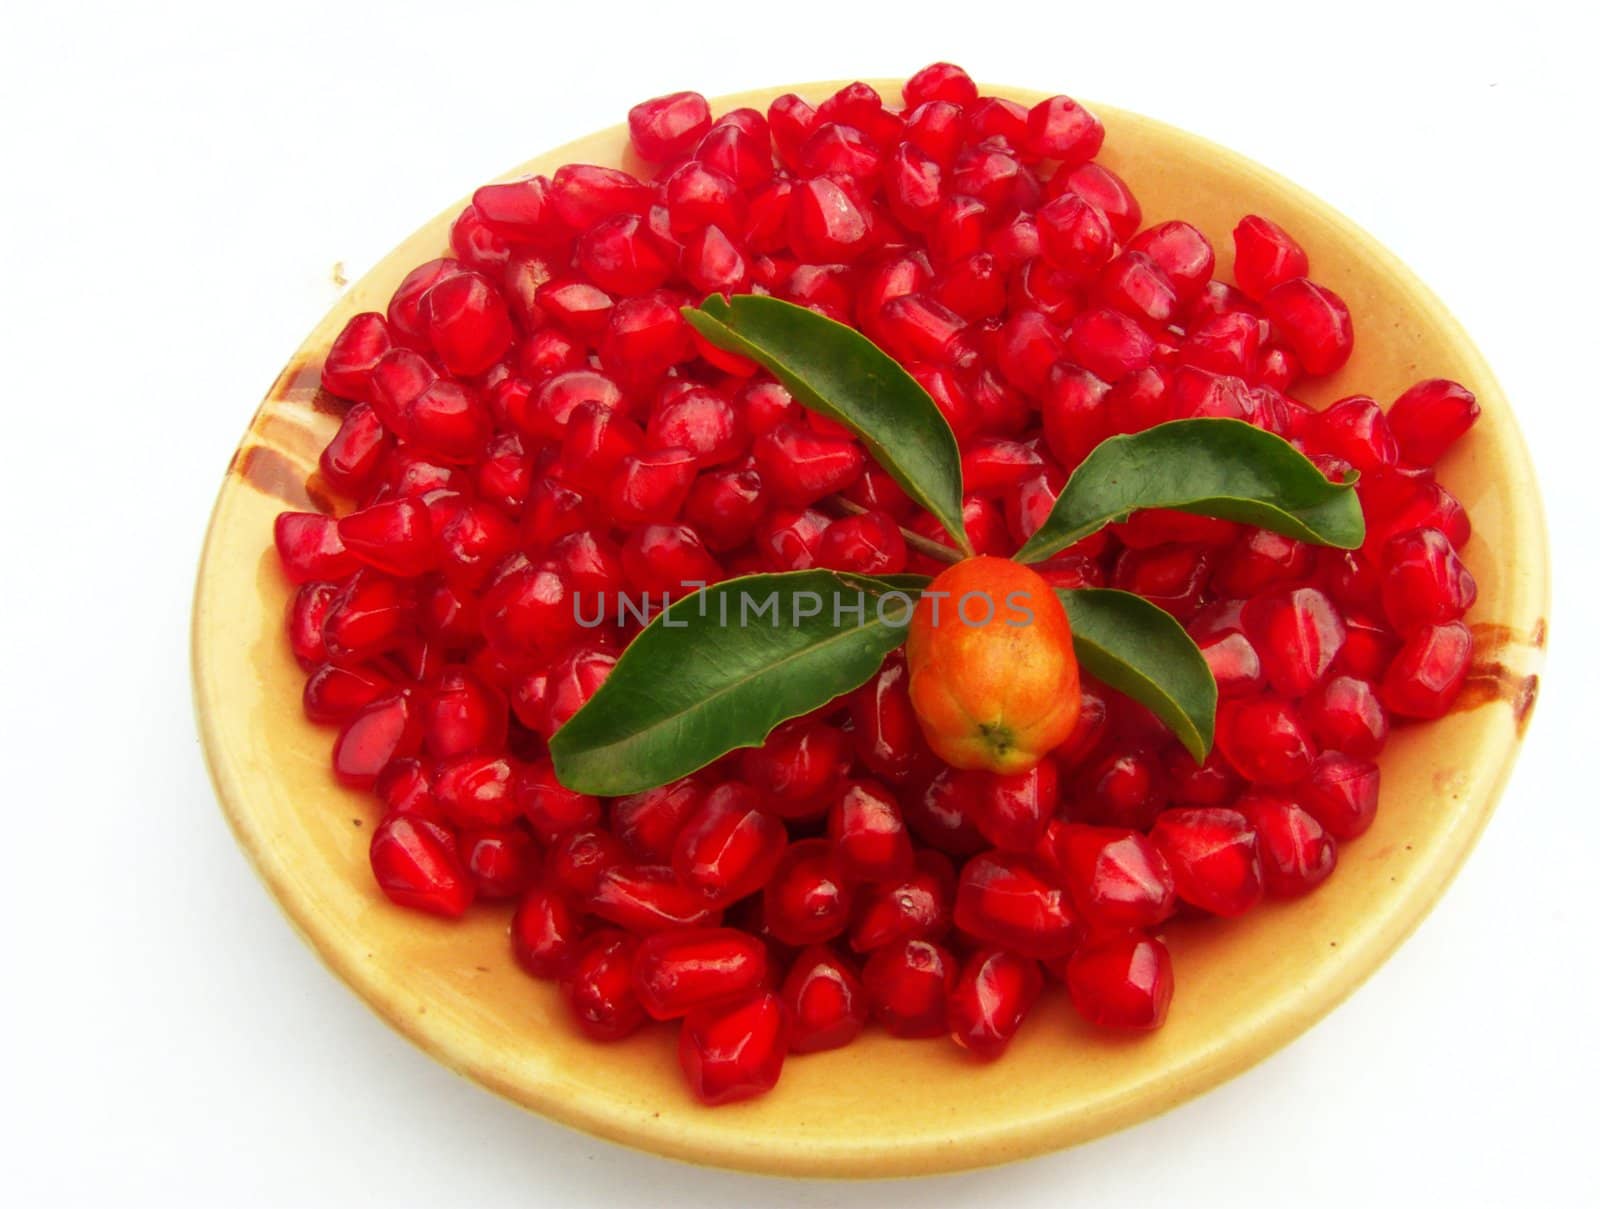 pomegranate (Punica granatum) seeds on a plate with leaves and a bud isolated on white